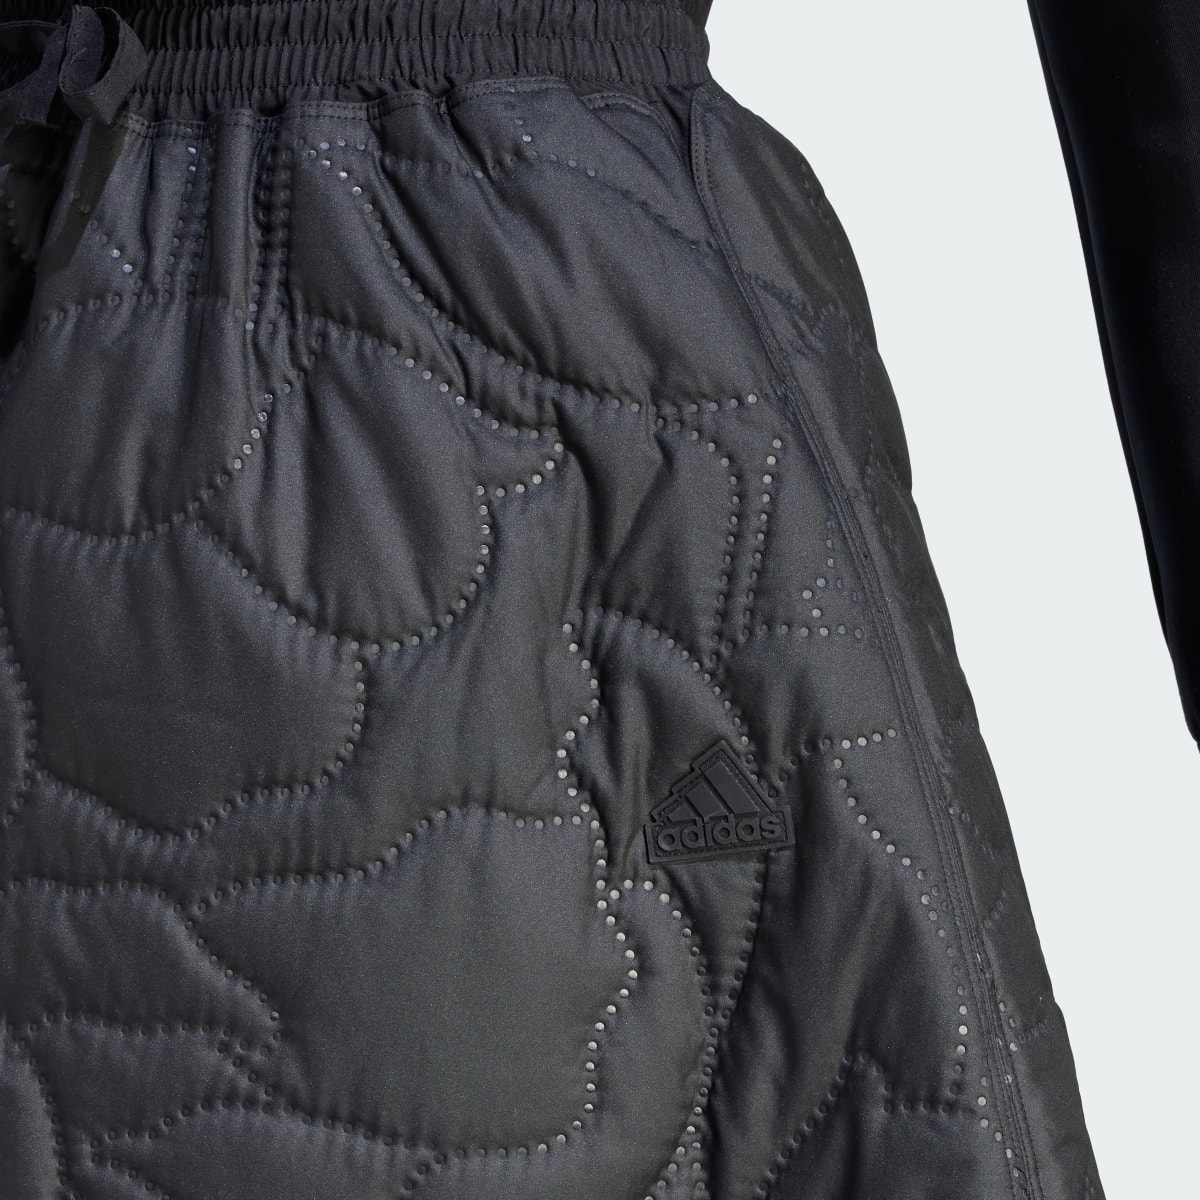 Adidas City Escape Quilted Skirt. 6